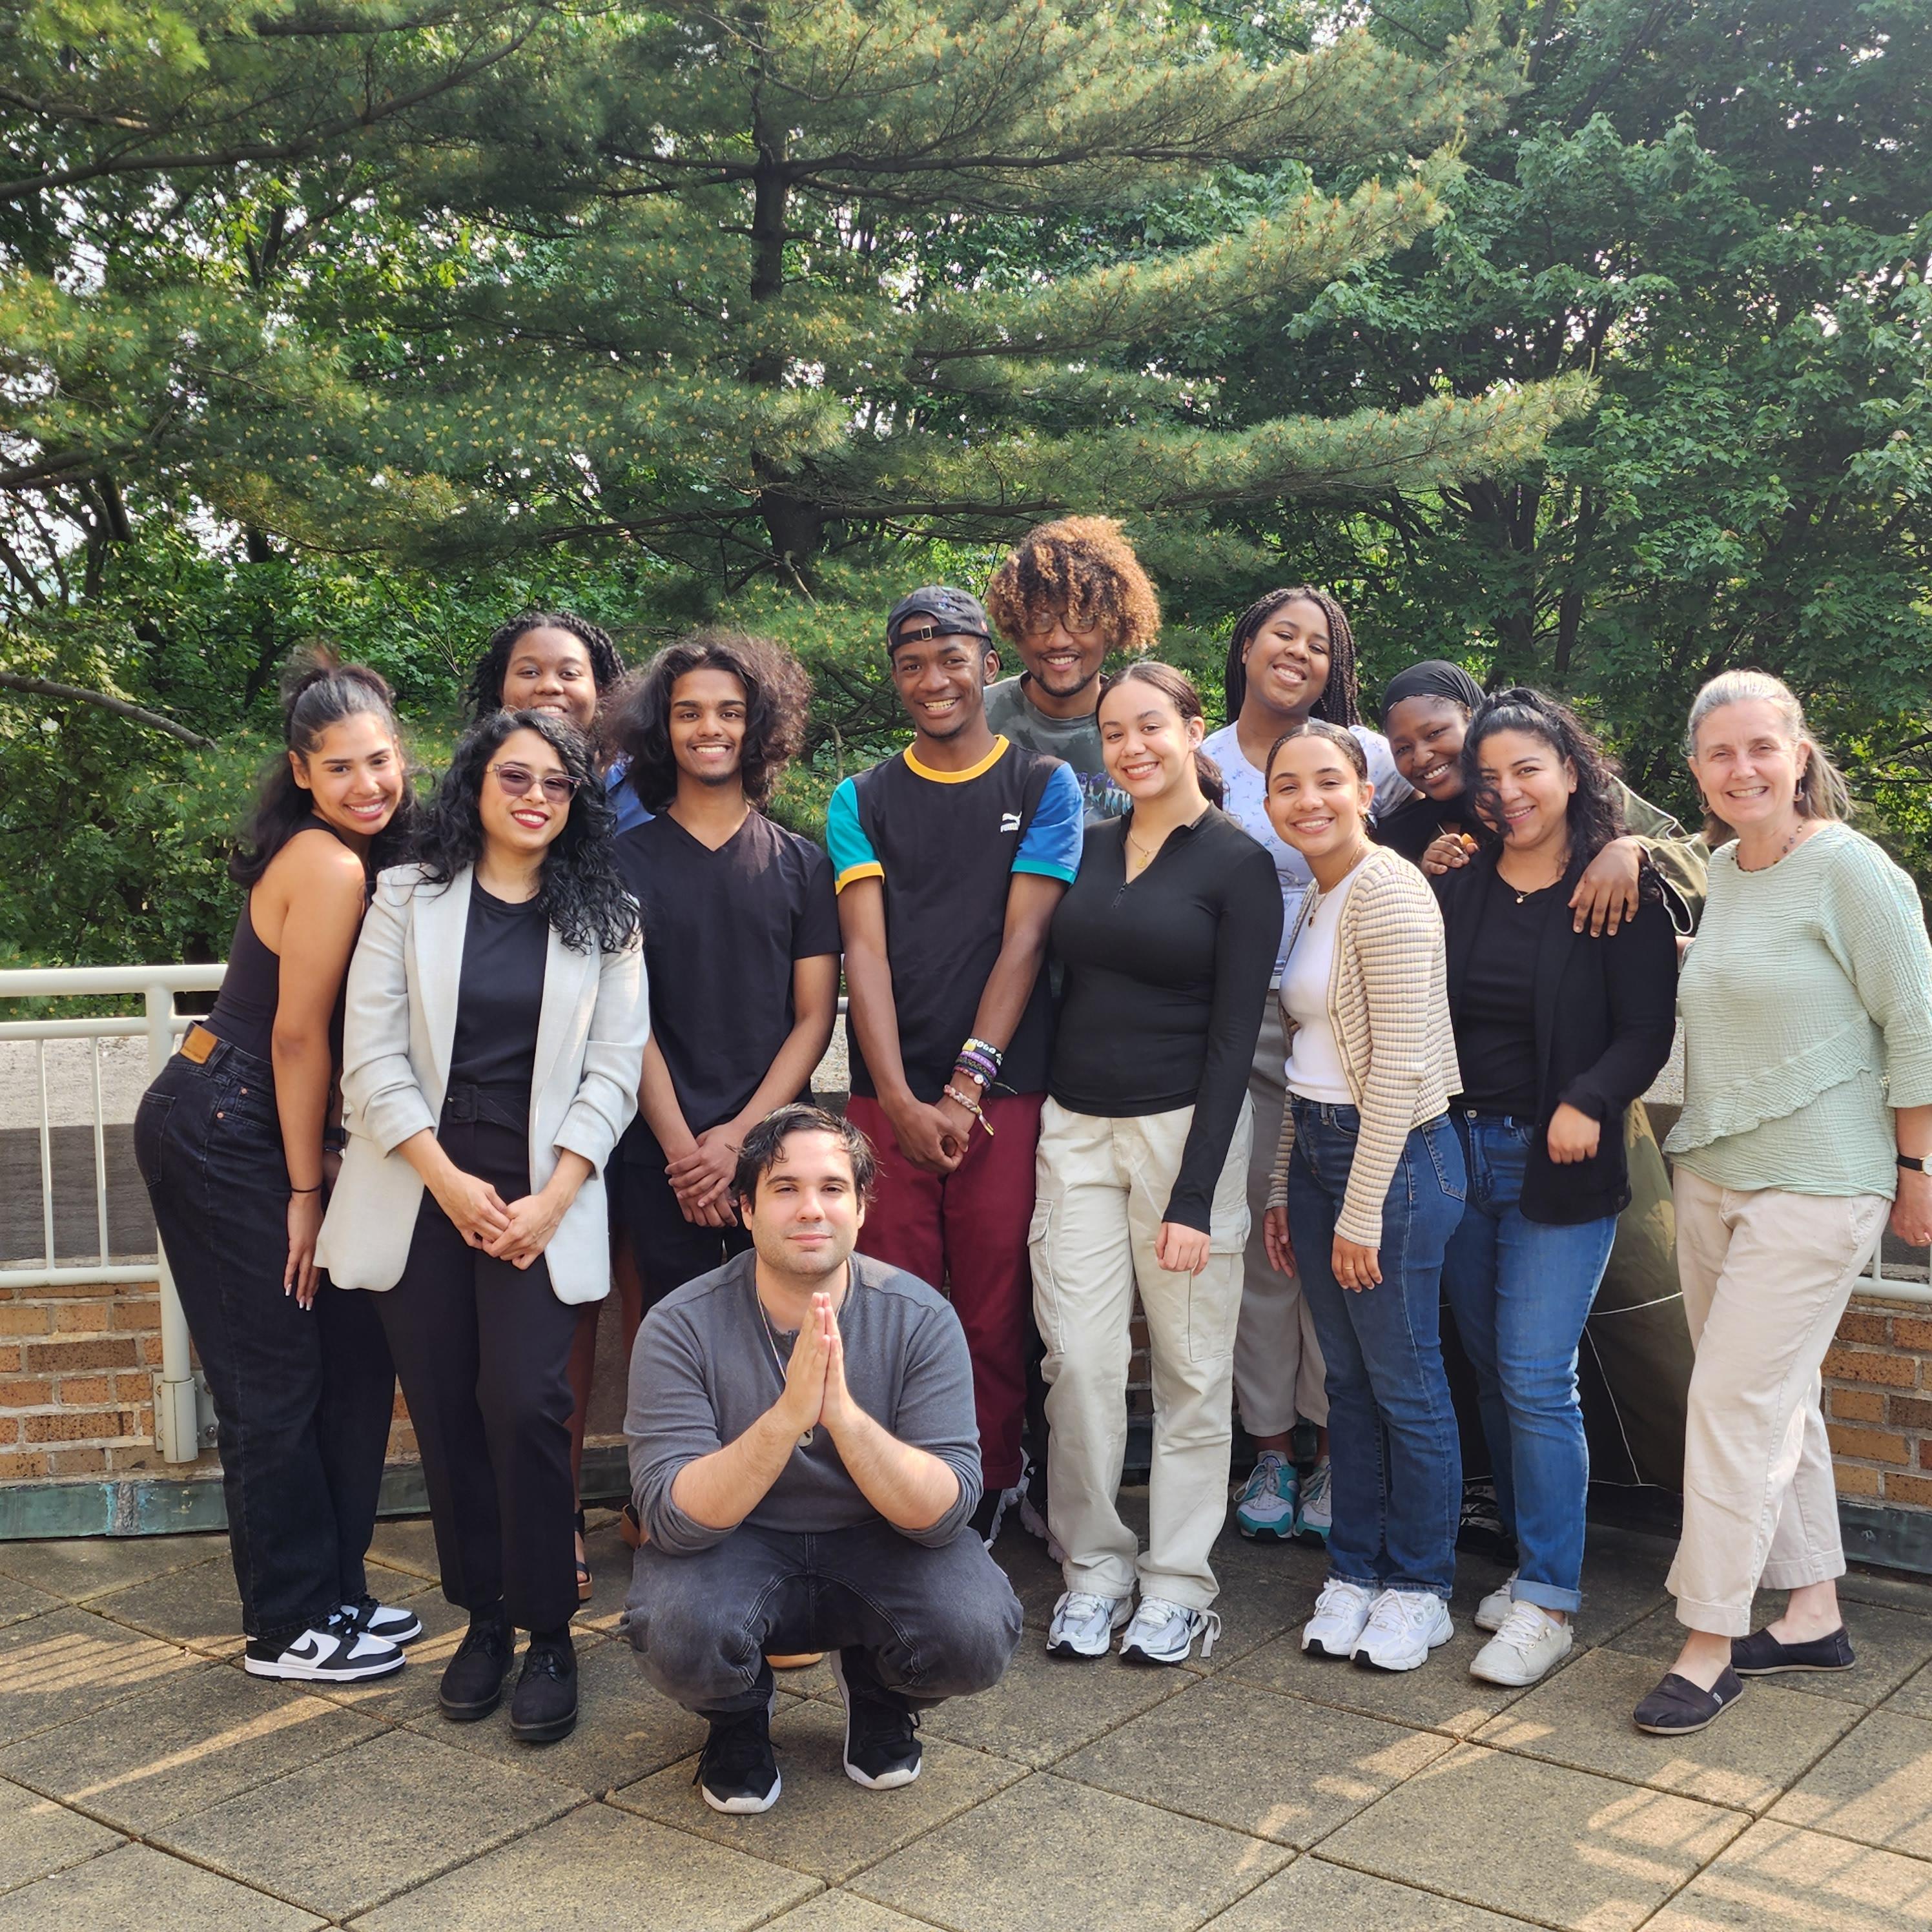 A diverse group of students poses with trees in the background.